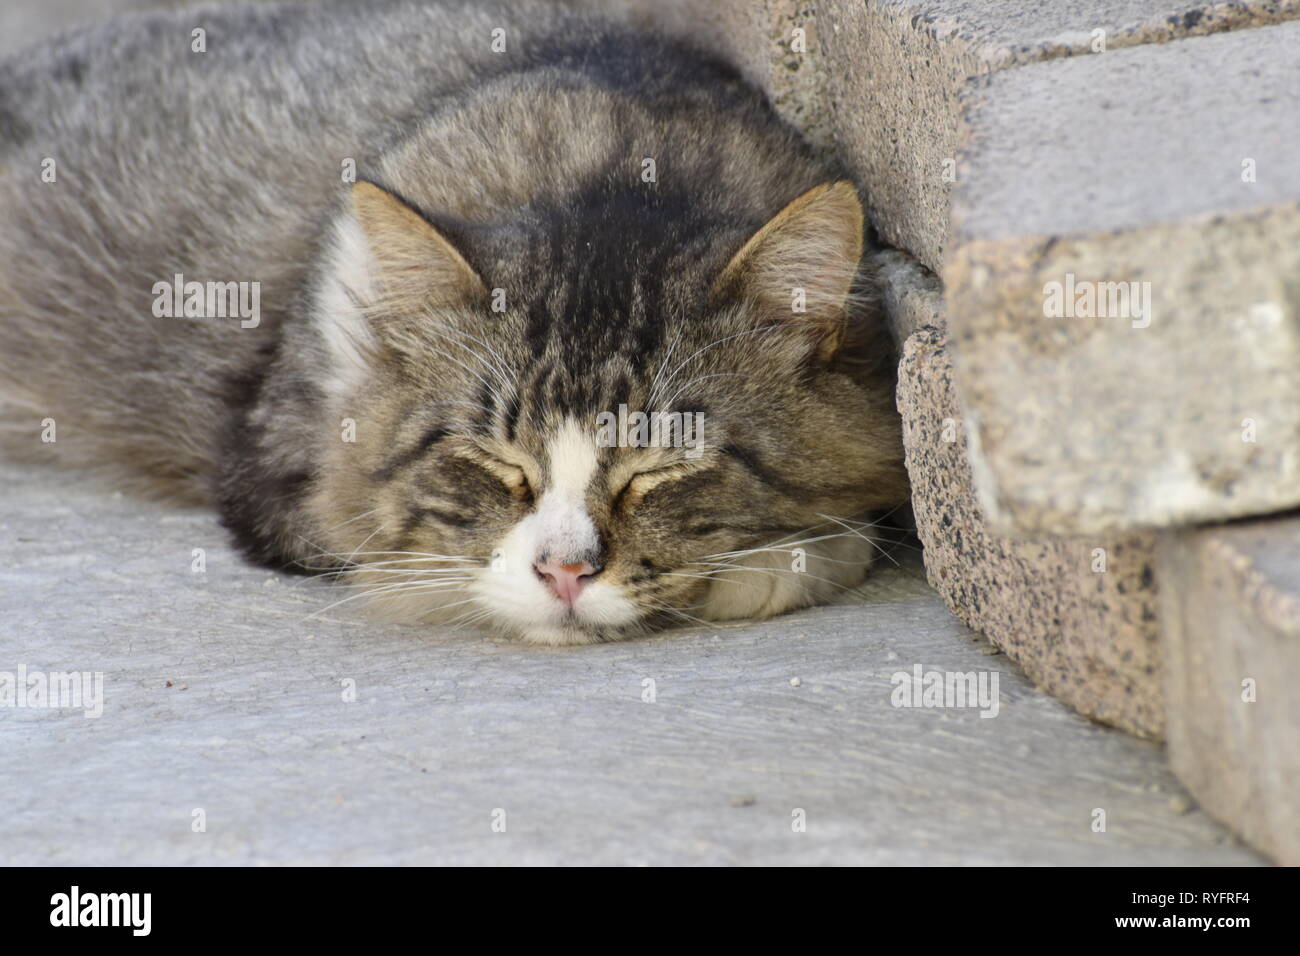 The image shows the beauty of a cat resting in peace. Stock Photo